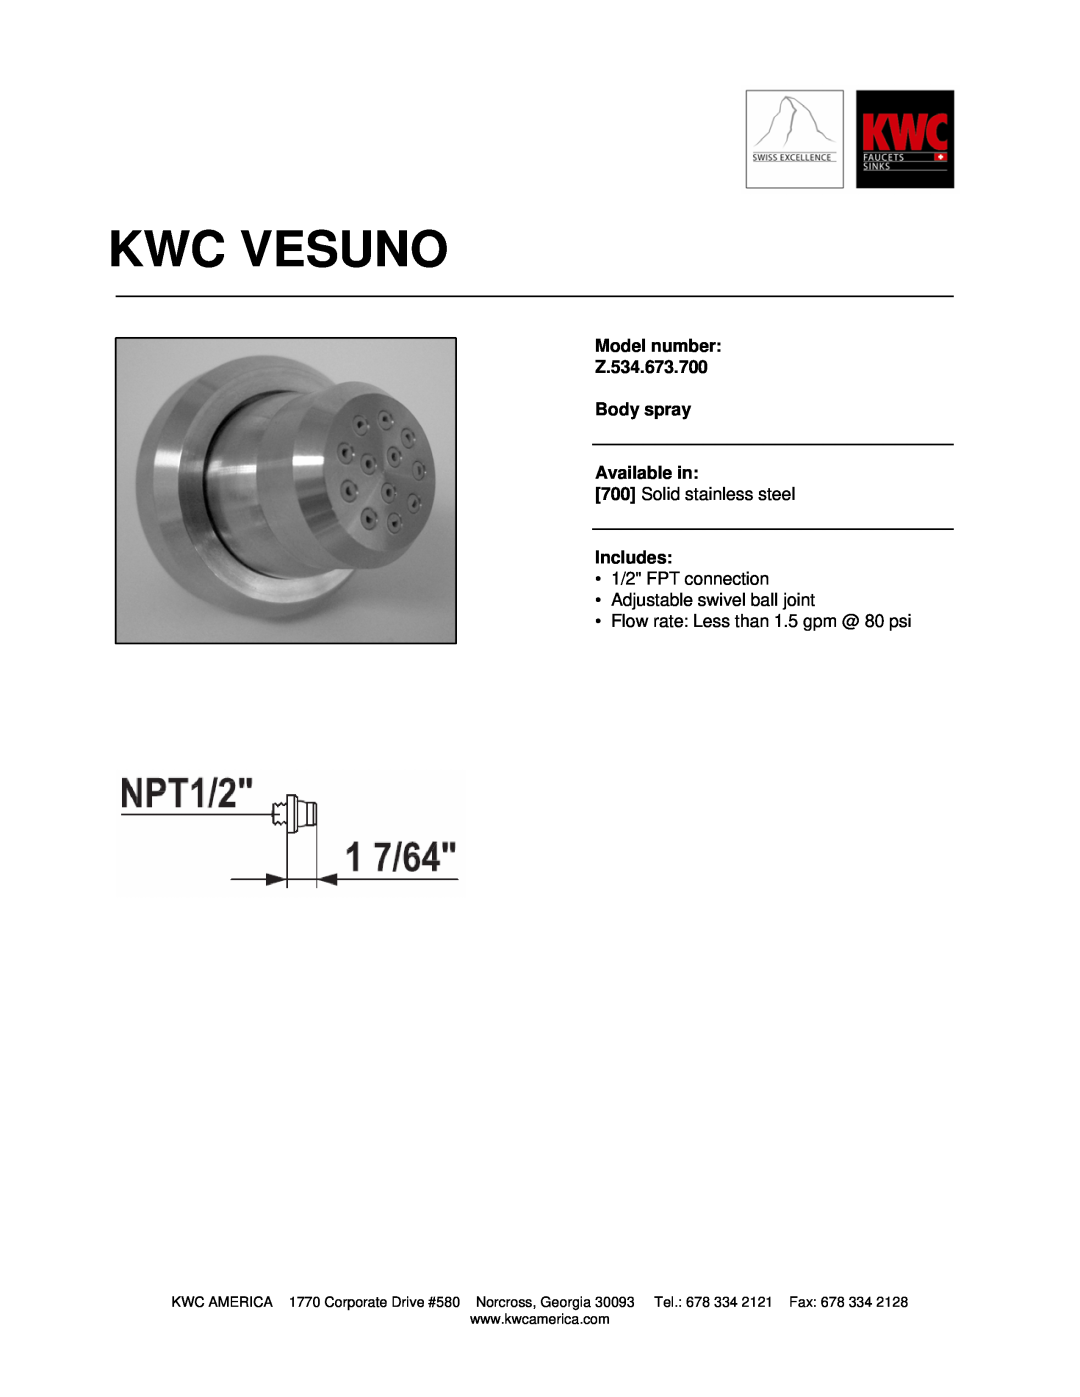 KWC manual Kwc Vesuno, Model number Z.534.673.700 Body spray, Available in, Solid stainless steel, Includes 